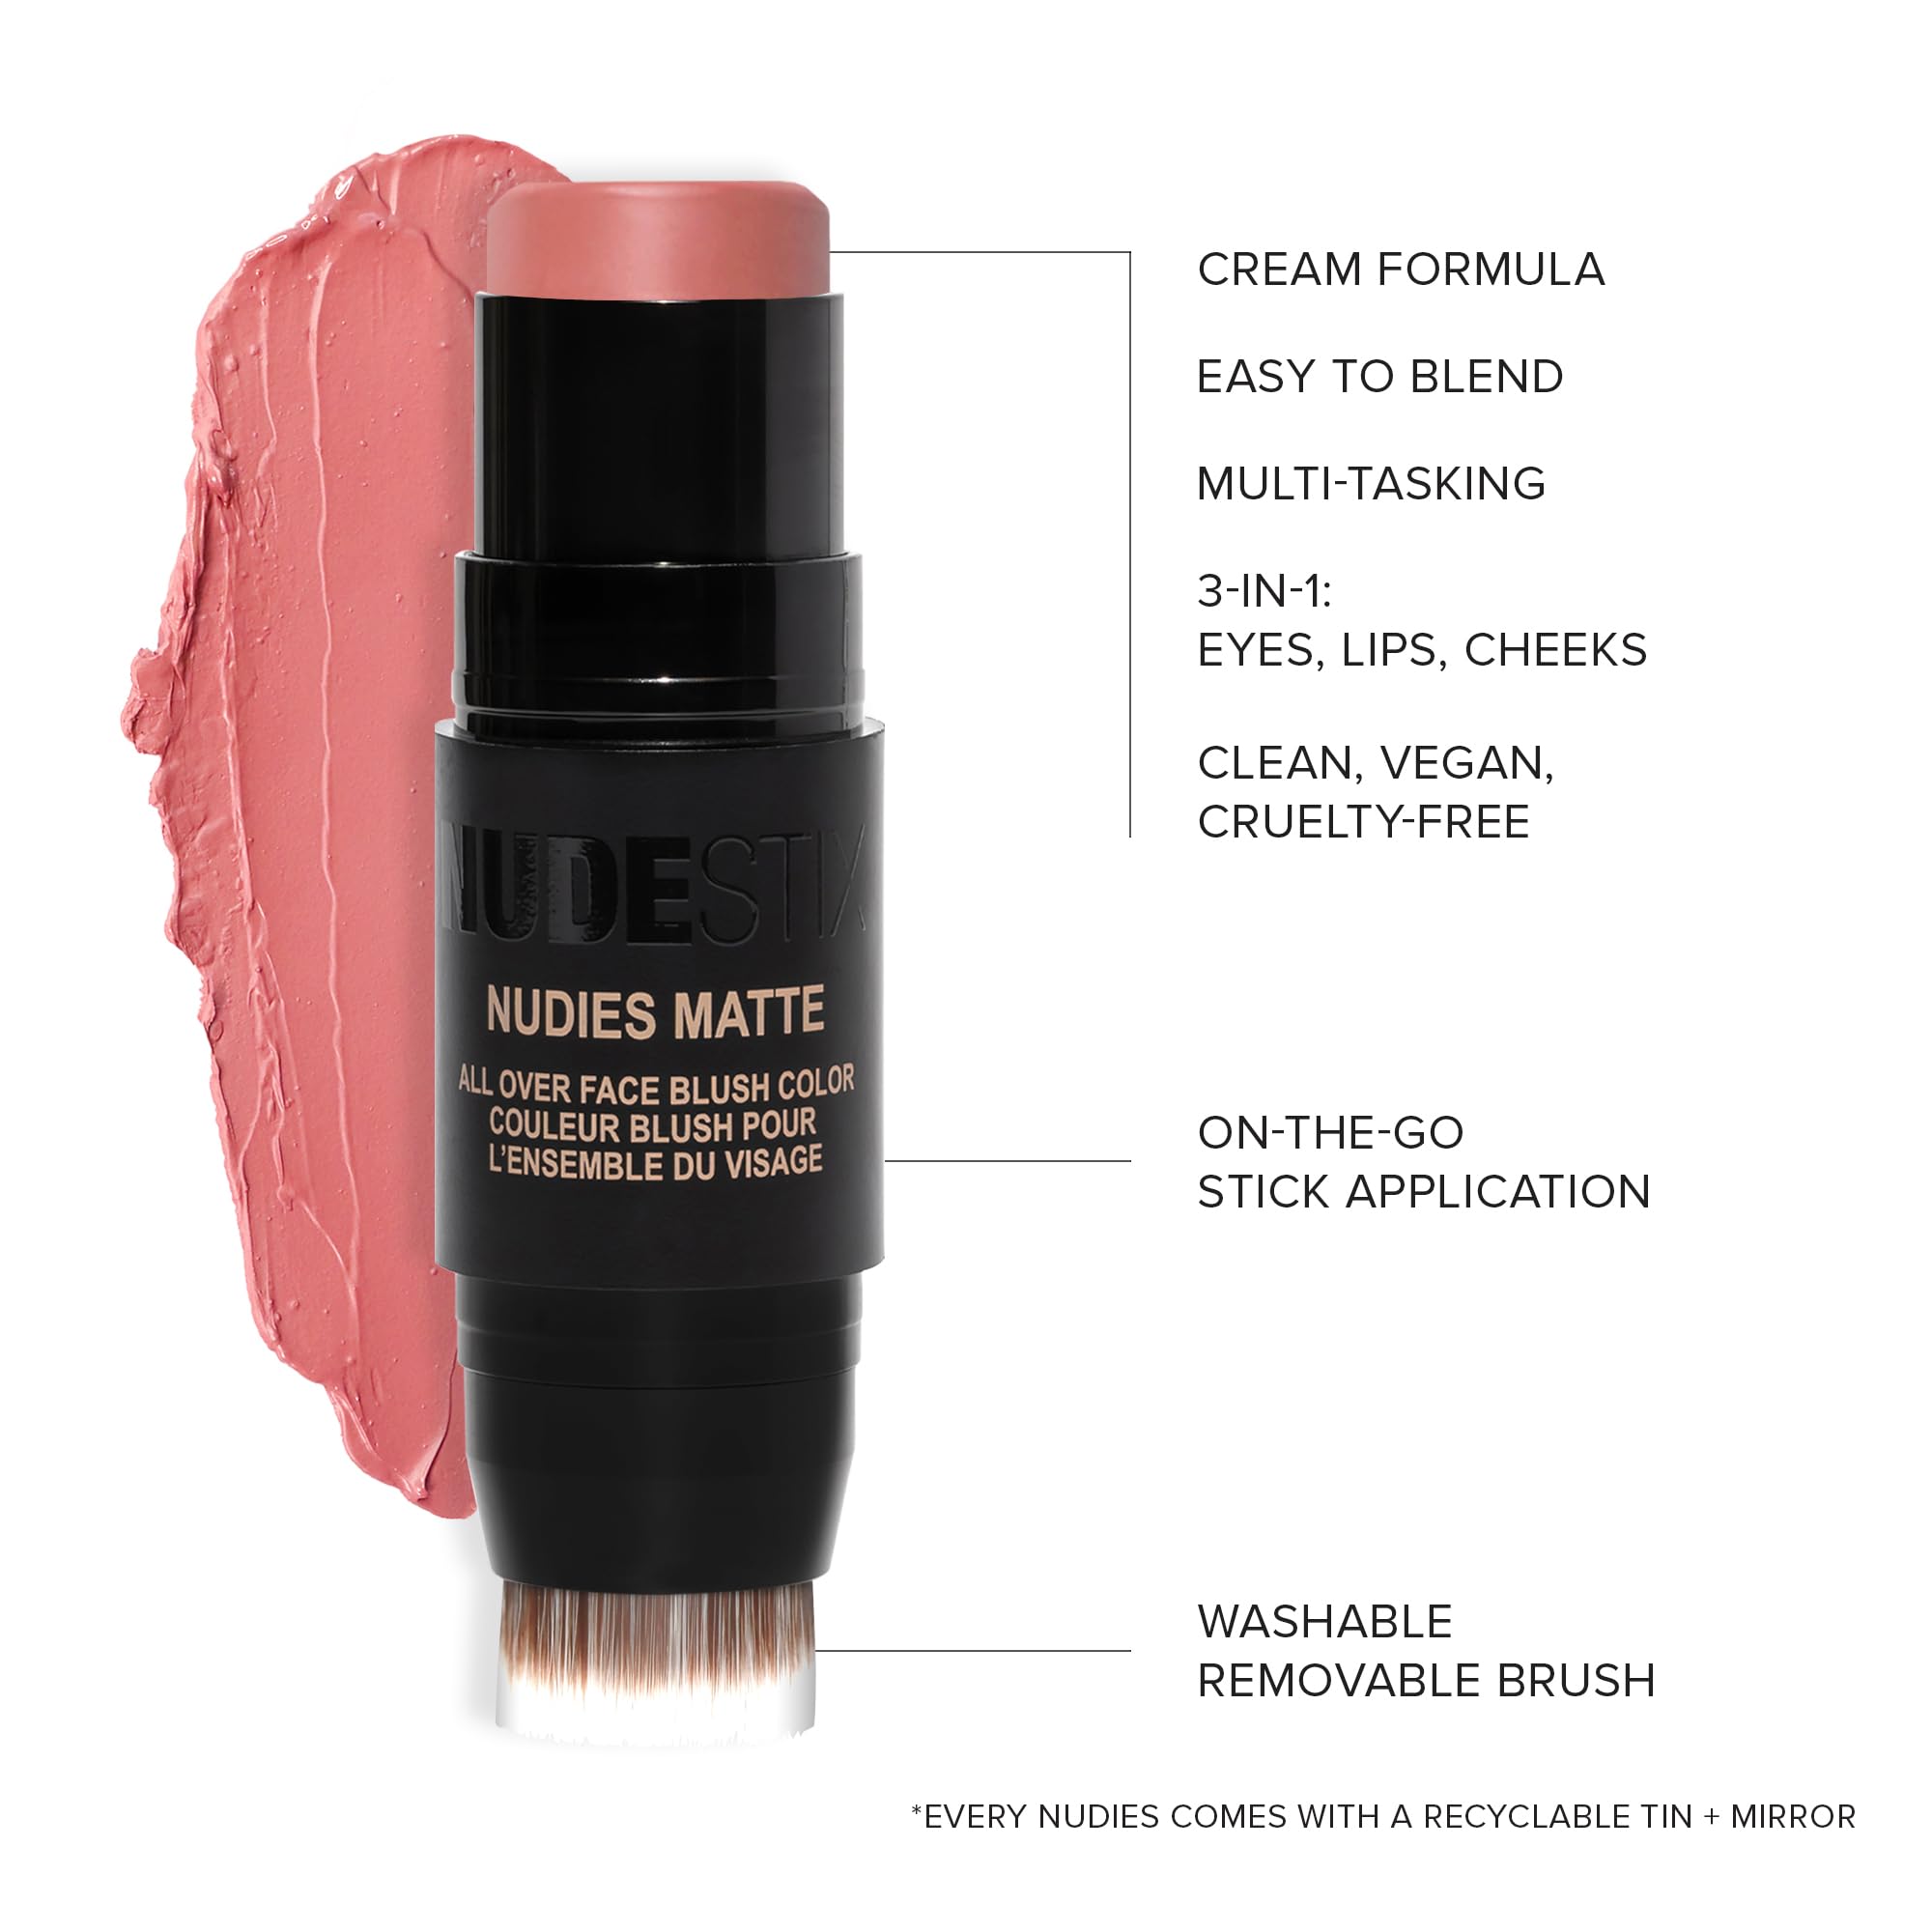 Nudestix Nudies Matte Cream Blush Stick 3-in-1 All Over Face Color - Blush Stick for Cheeks Eyes and Lips - Cream Blush for Cheeks w/Blending Brush (Naughty N' Spice)